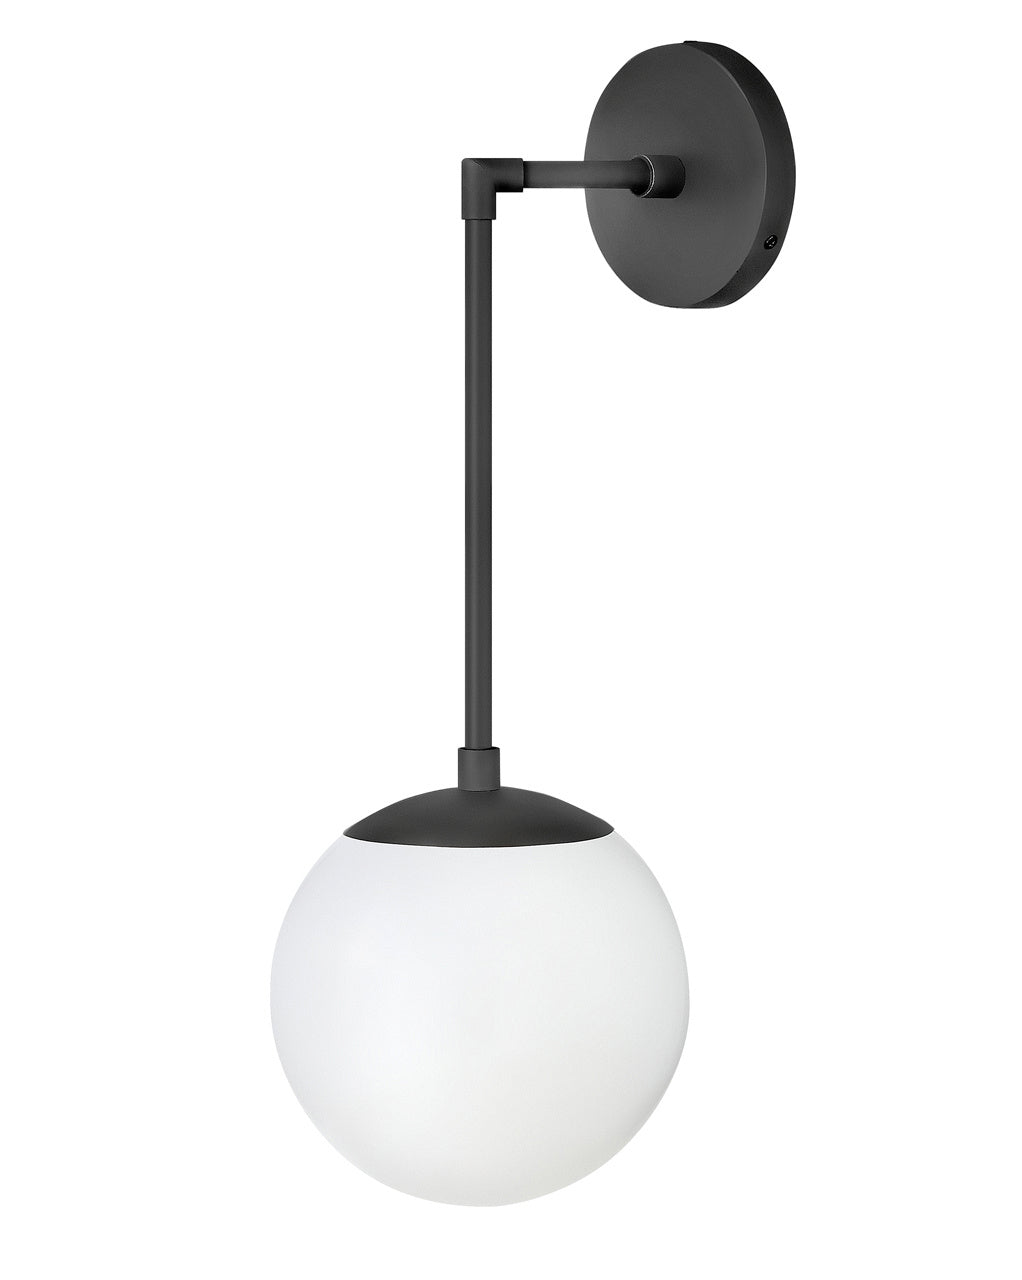 Hinkley Canada - LED Wall Sconce - Warby - Black with White glass- Union Lighting Luminaires Decor